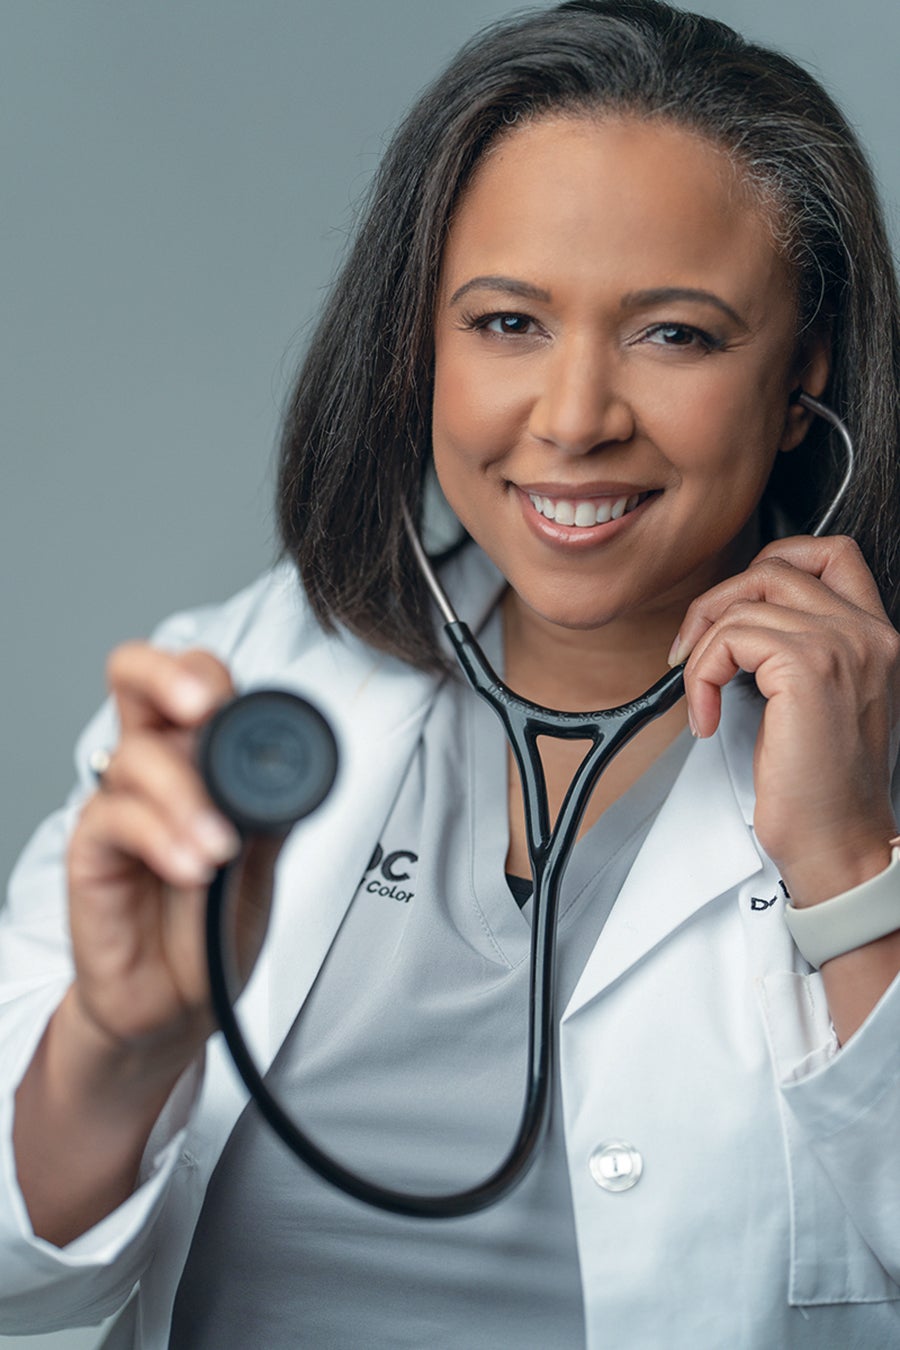 an African American woman wears a white medical coat and holds up a stethoscope